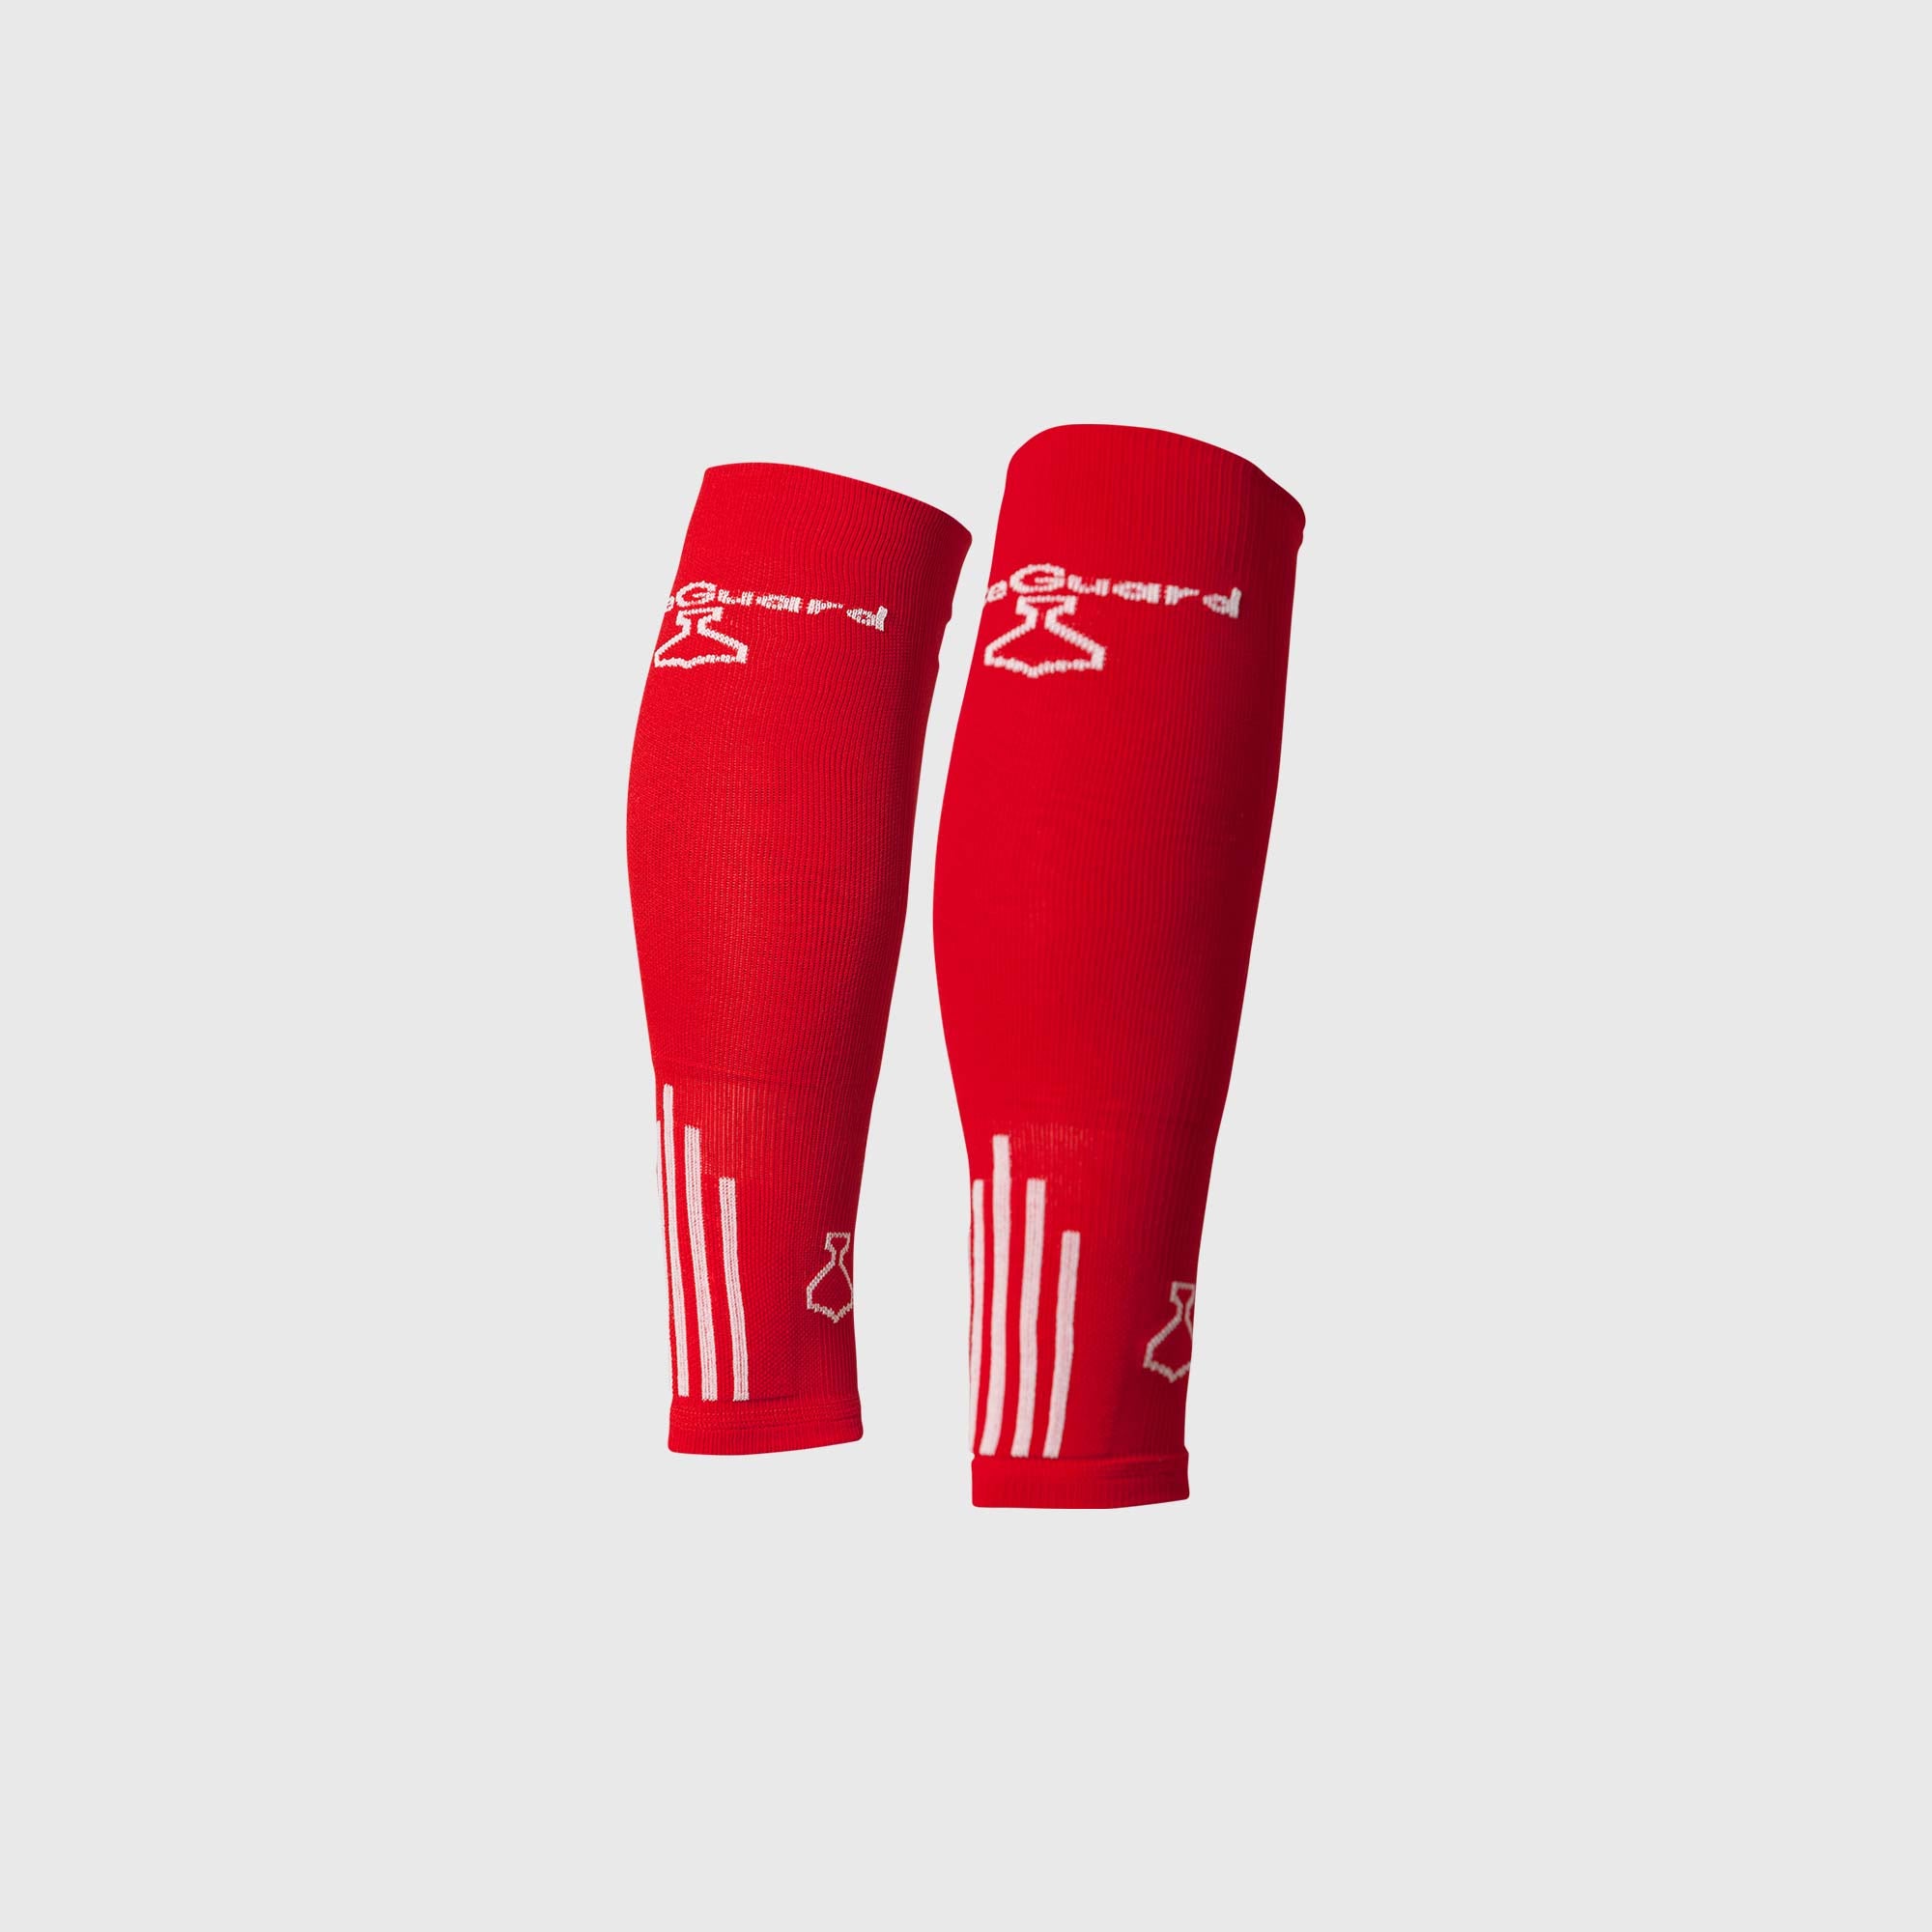 Performance Sleeve - Red